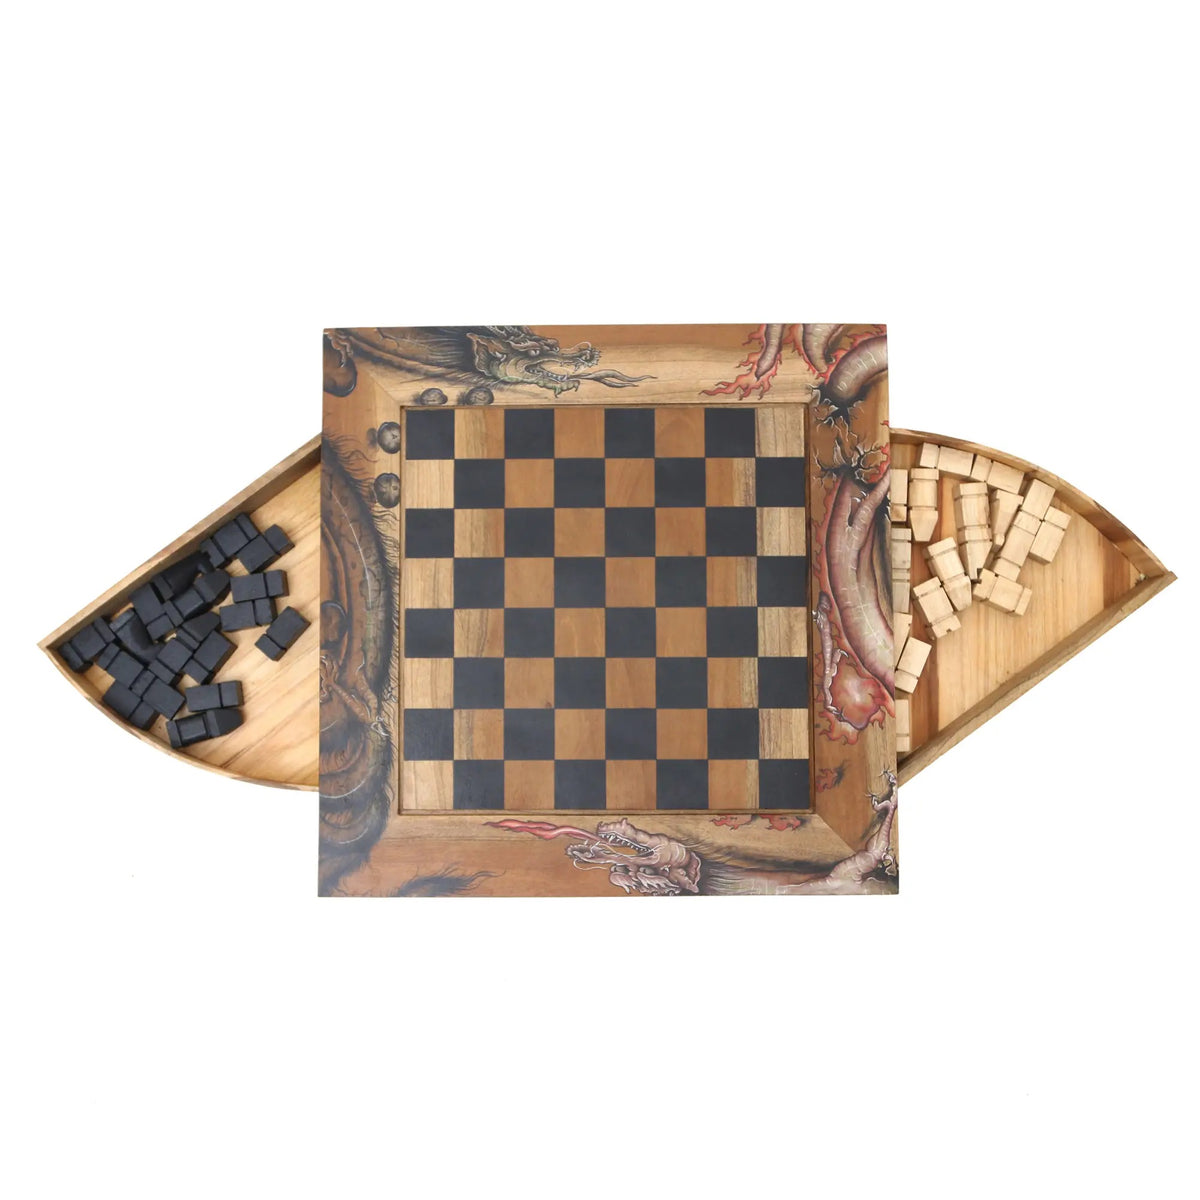 Handcrafted wood designer chess set with storage